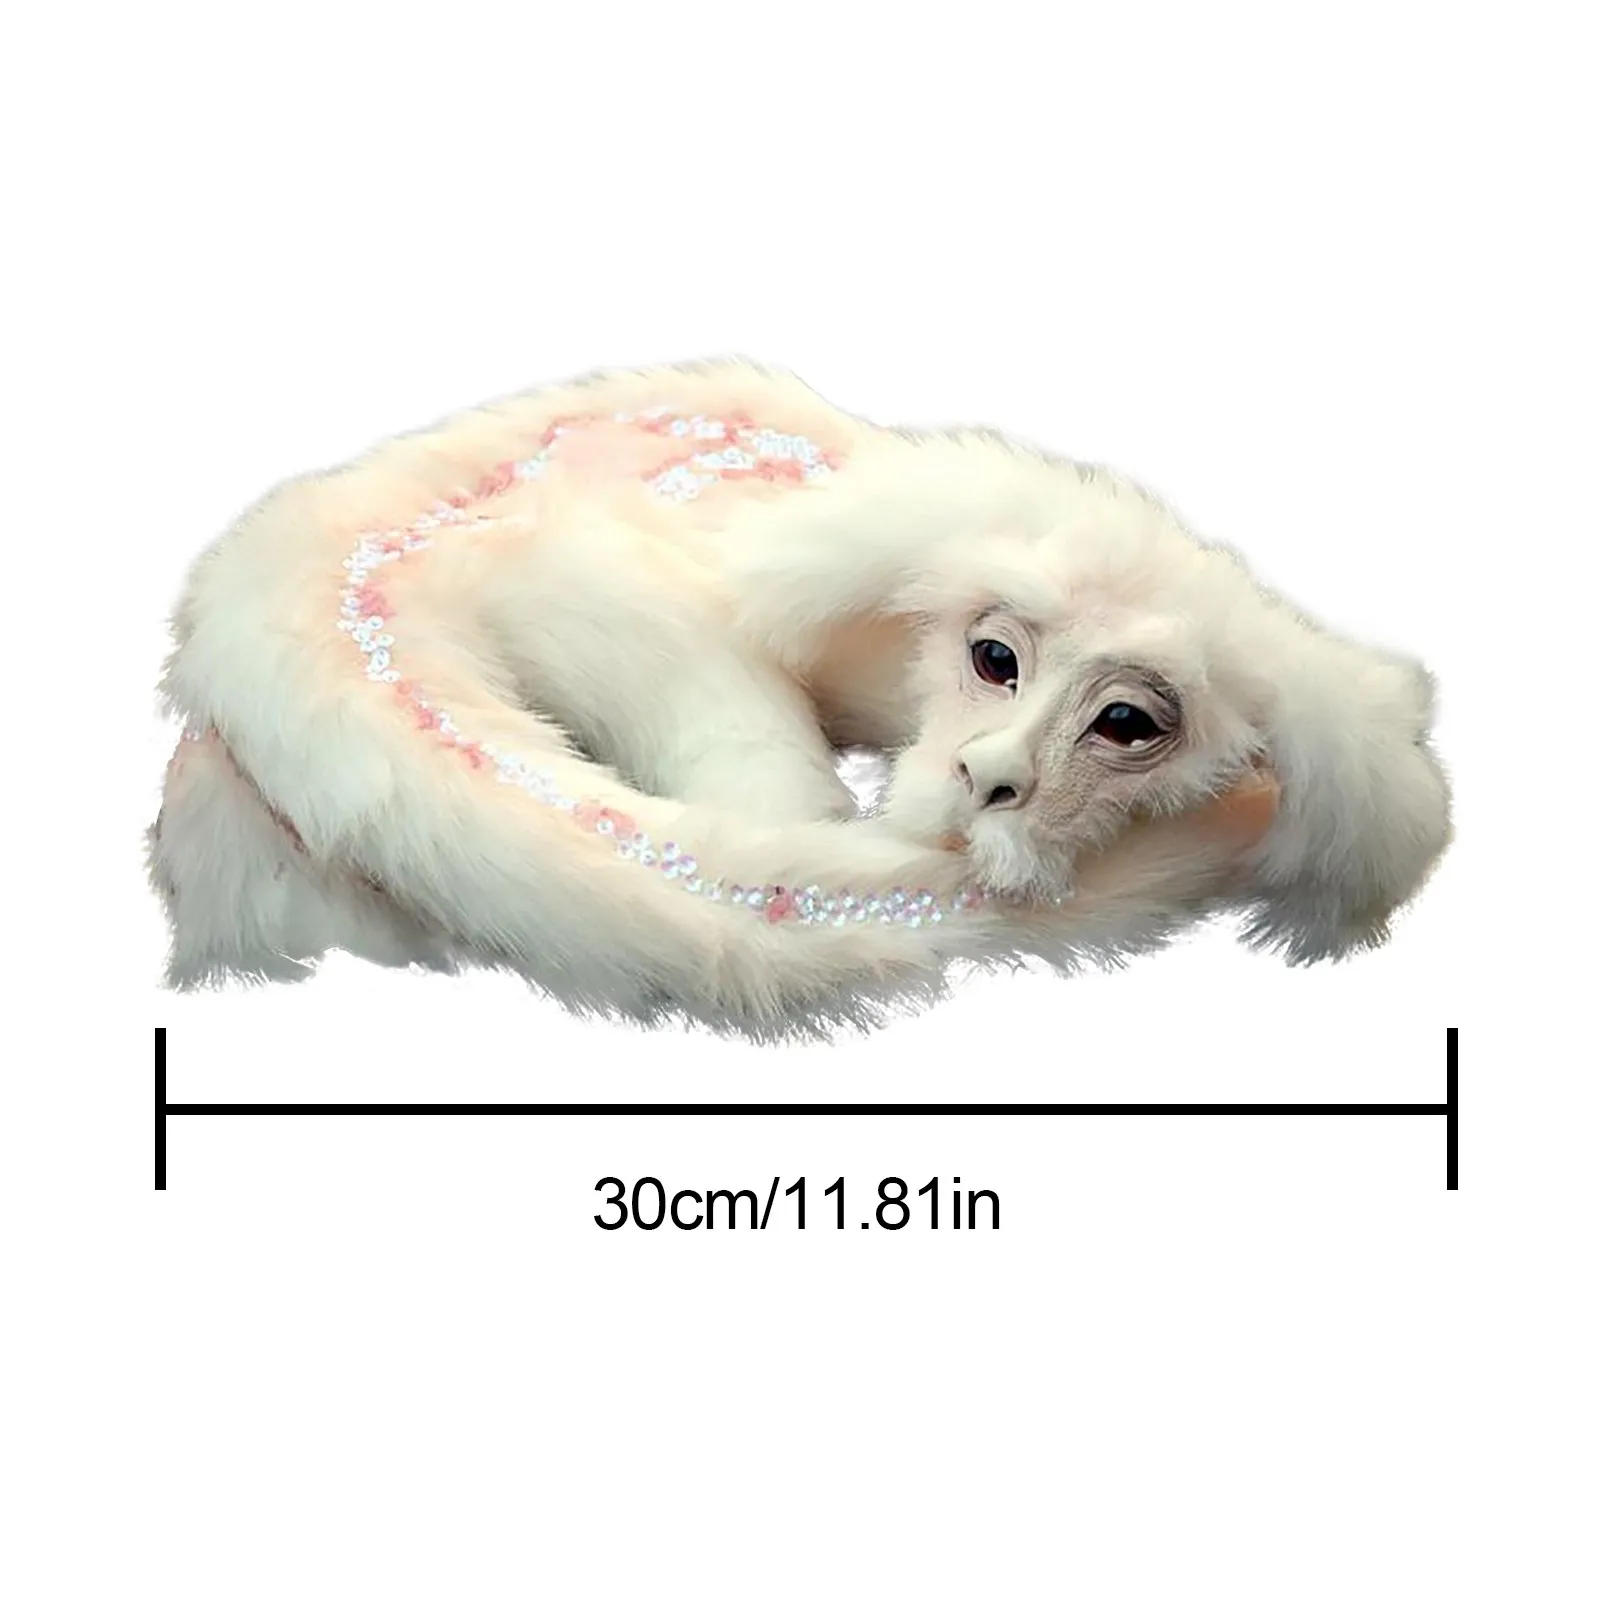 Falkor From The Neverending Story Plush Doll Toys Gift For Kids And Adluts Outside Hang Toy Cute Auto Accessories Car Decoration